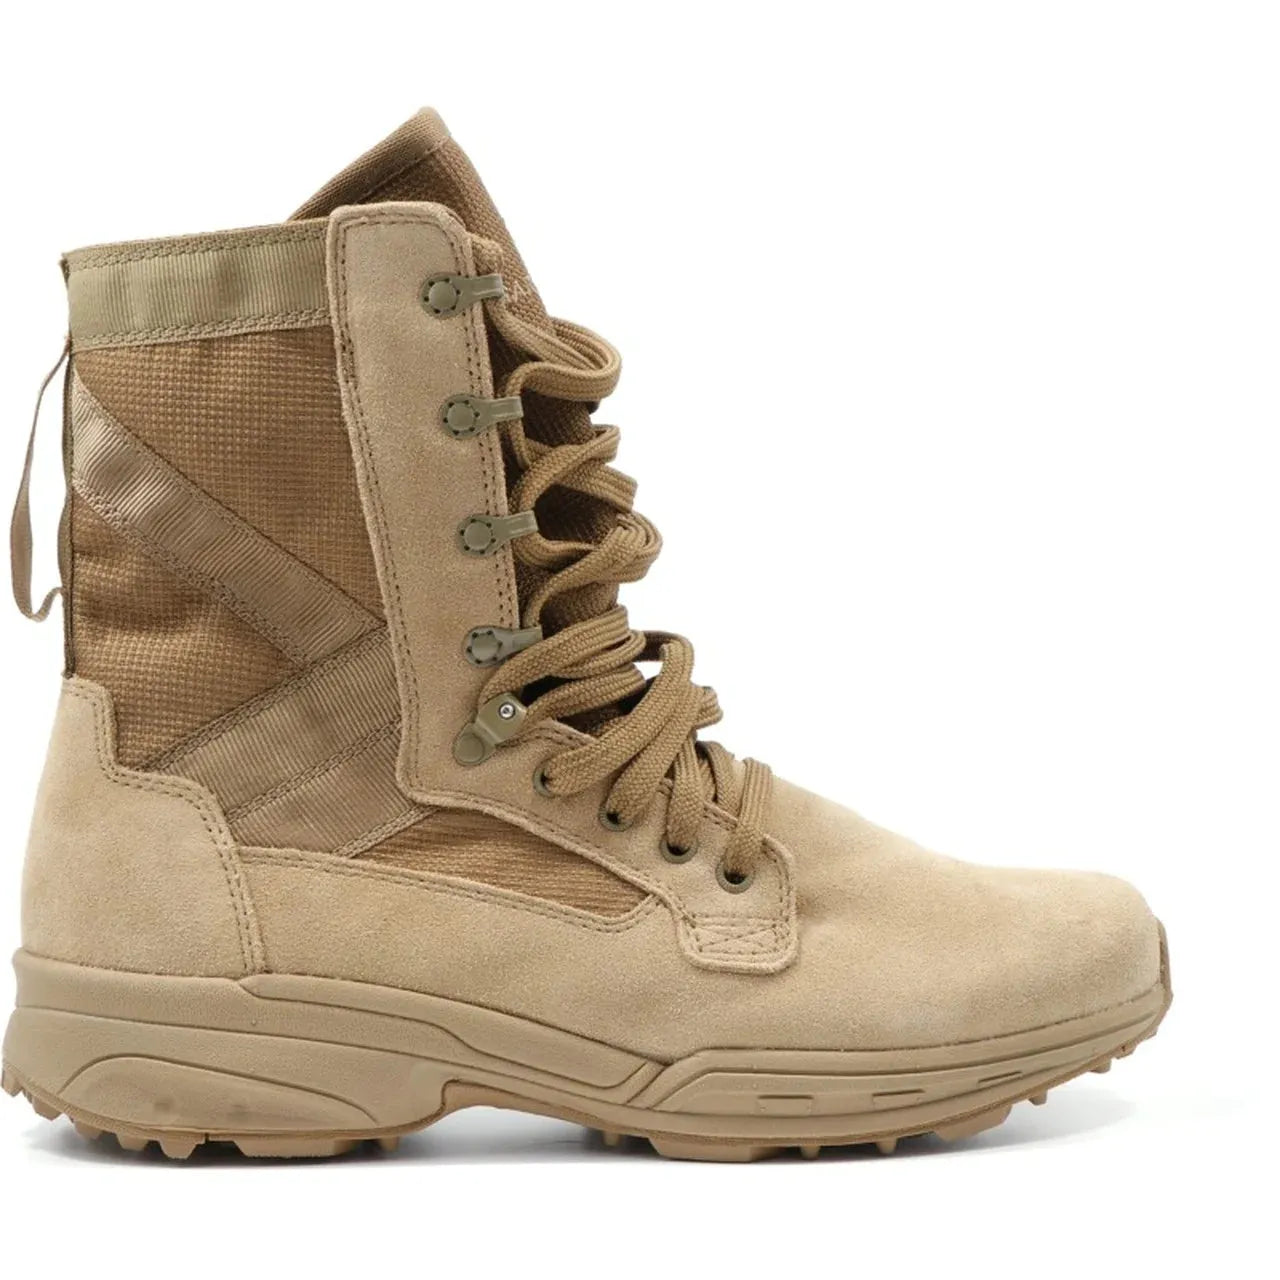 Tactical NFS Boot by Garmont